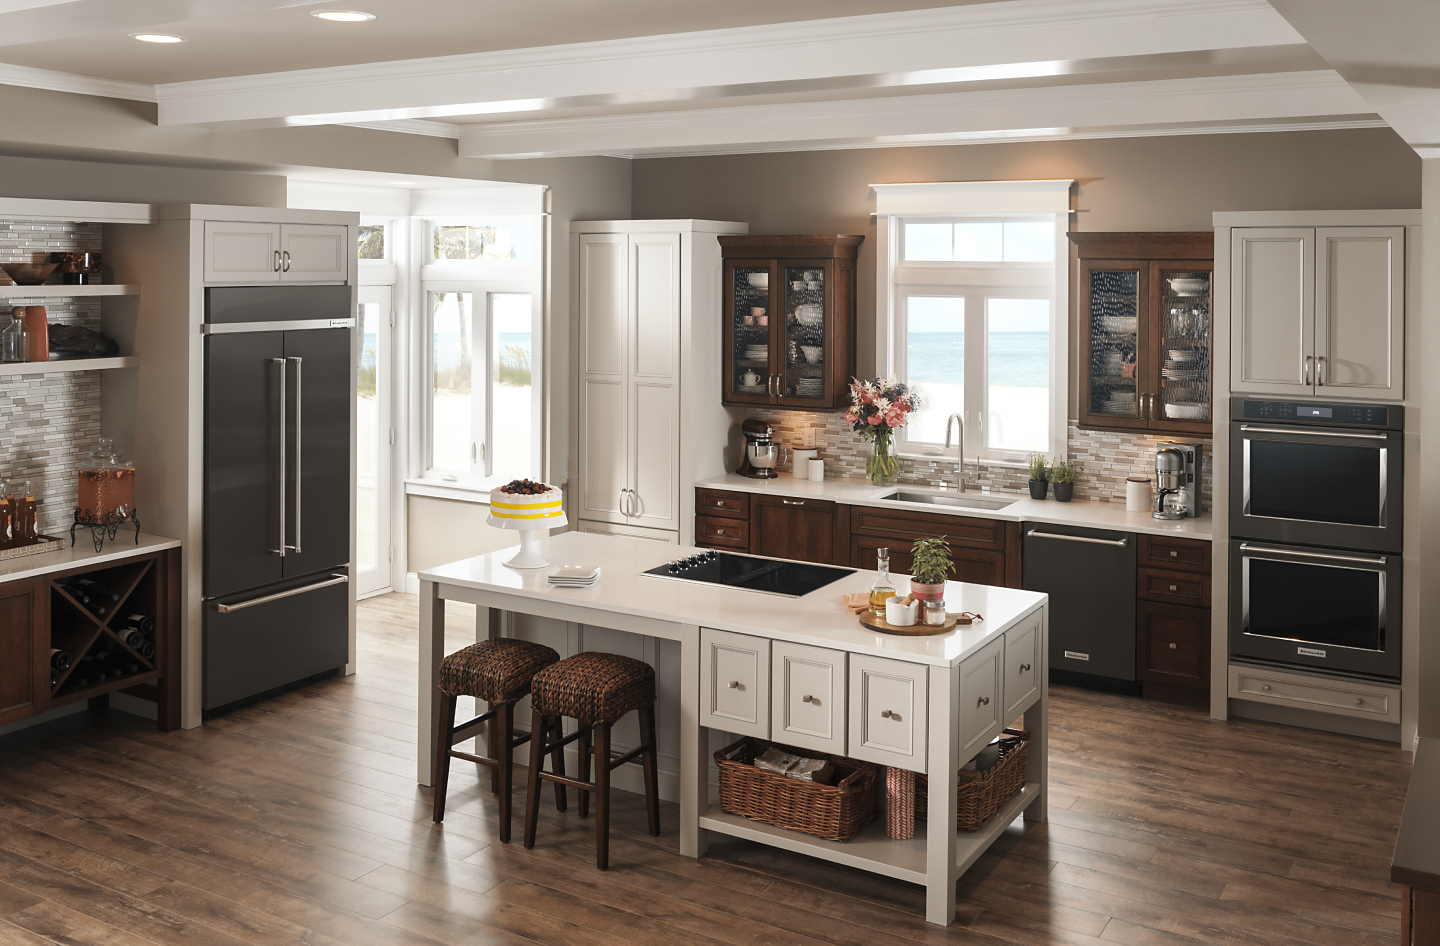 Full kitchen view with black french door refrigerator adjacent to island cooktop